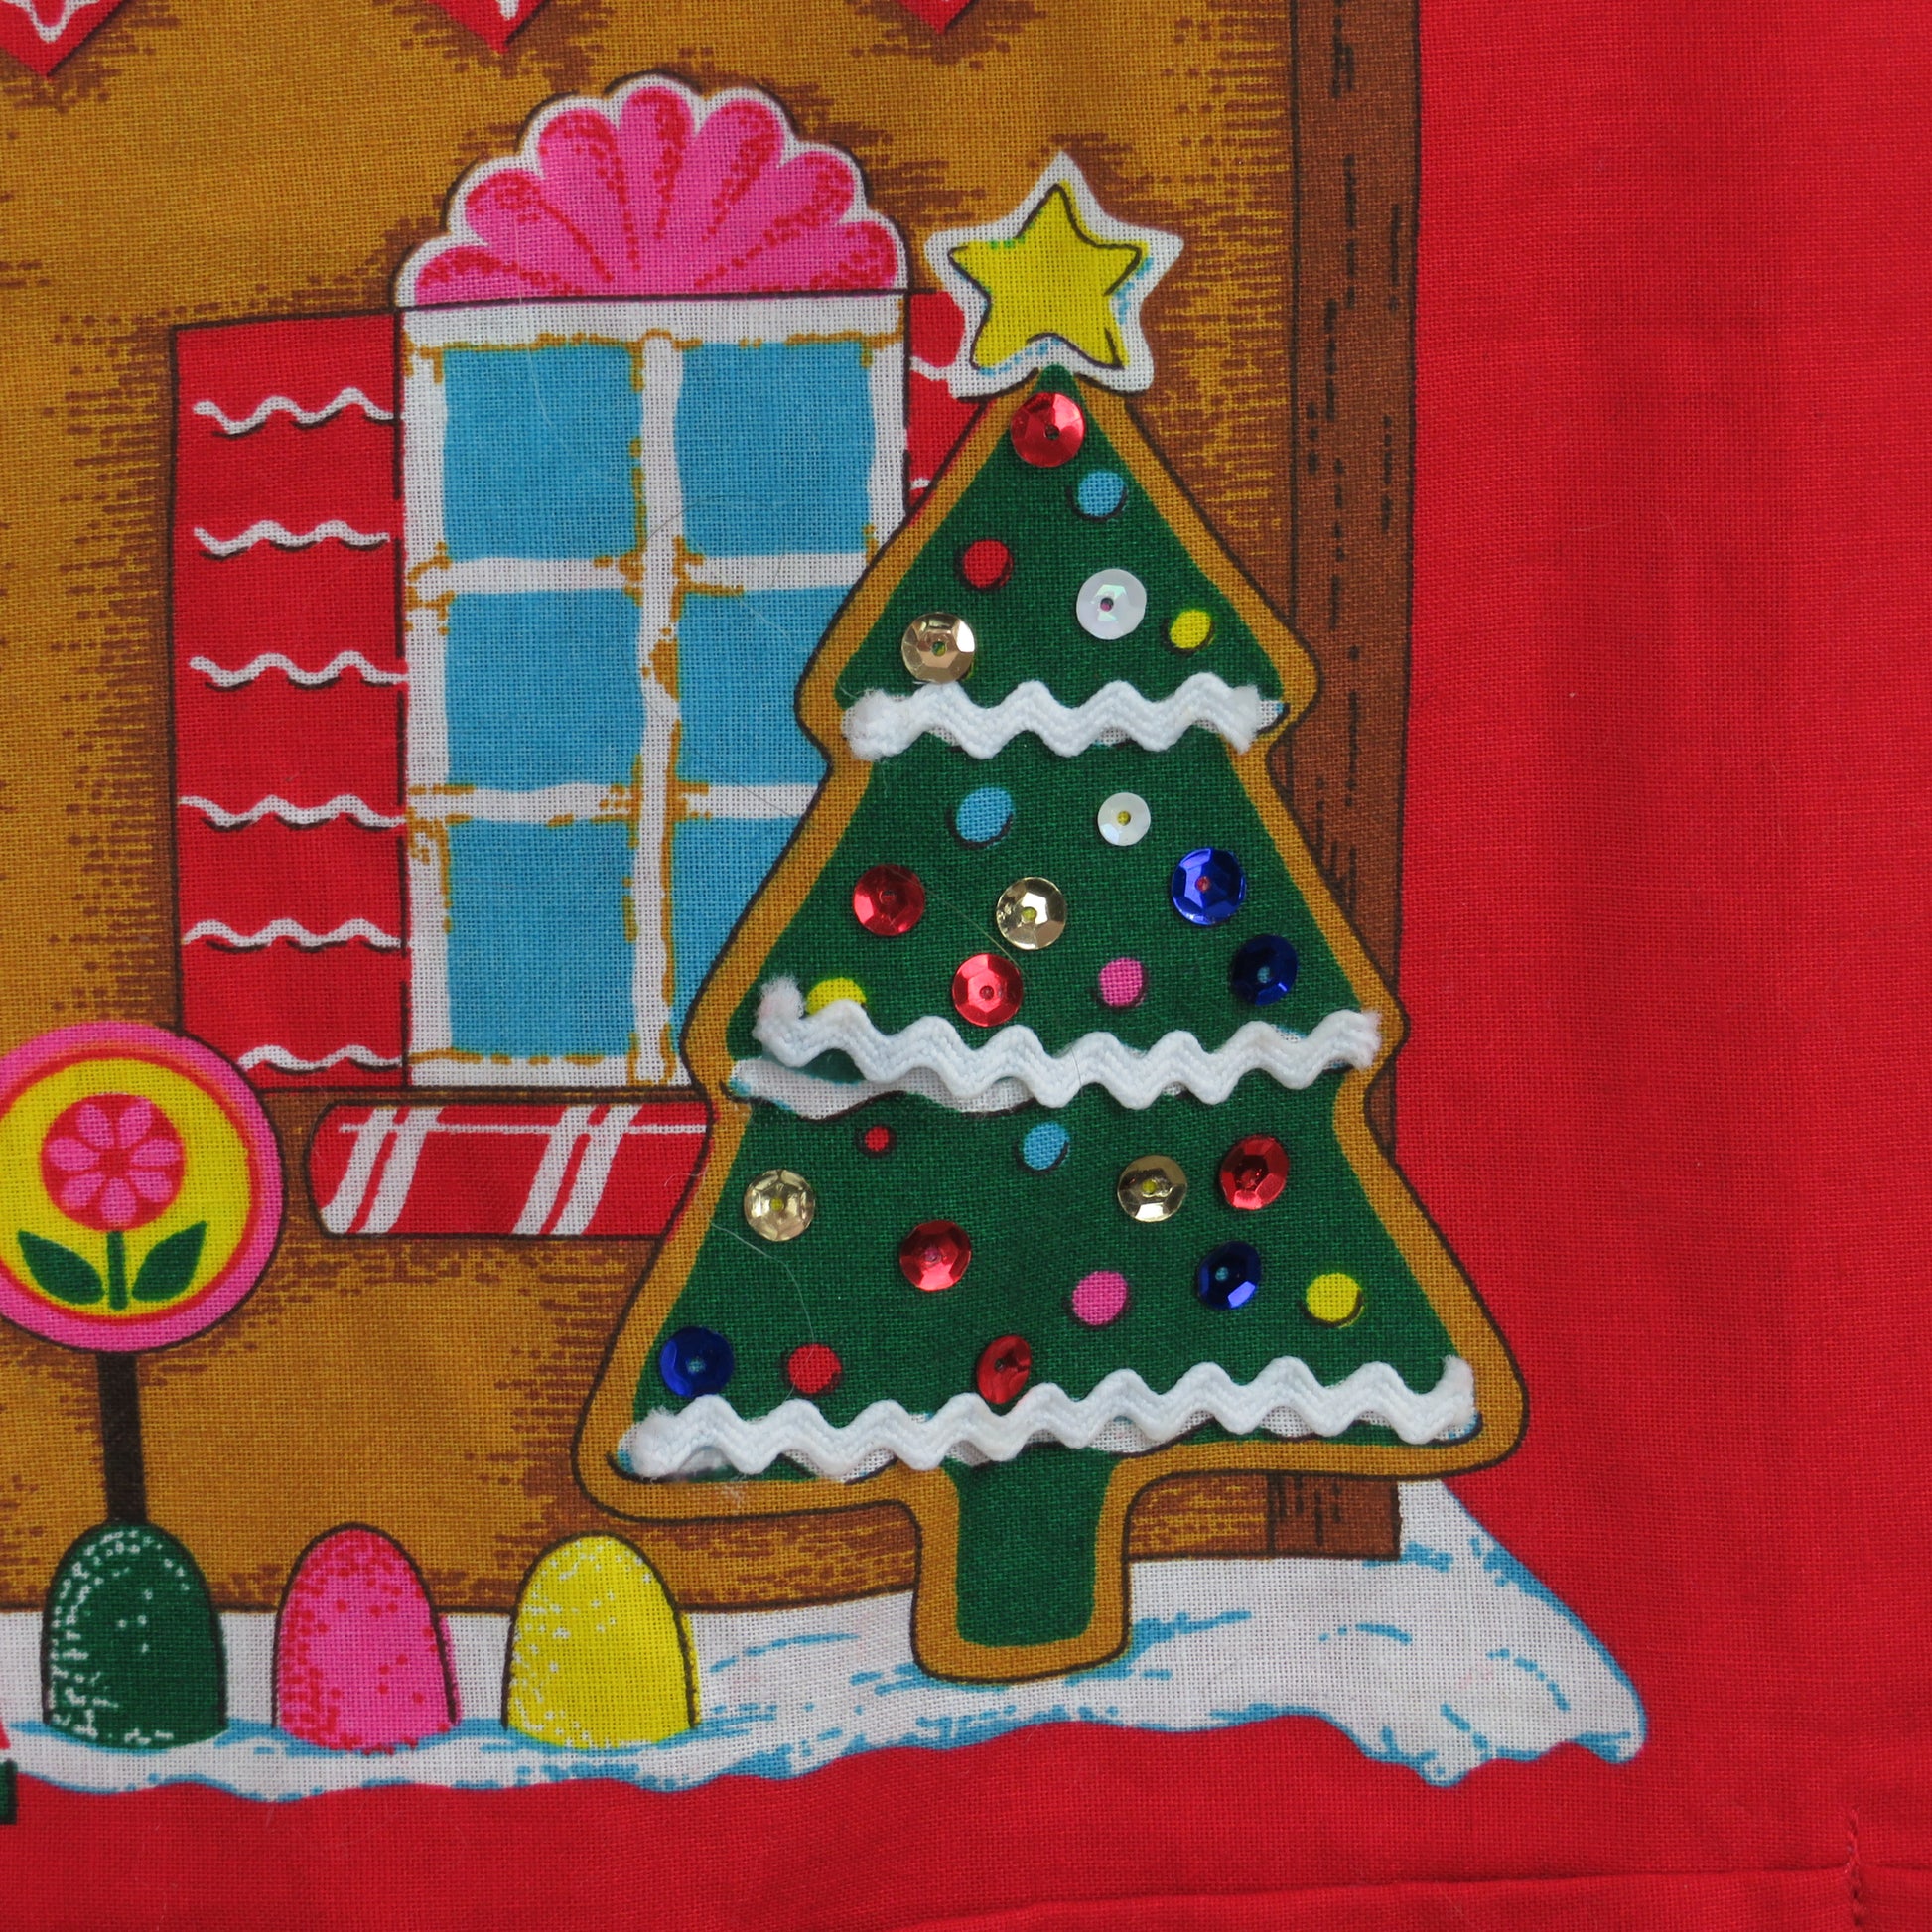 Vintage Gingerbread House Card Holder Merry Christmas Fabric Wall Hanging Holiday Decoration, Christmas Decoration - At Grandma's Table